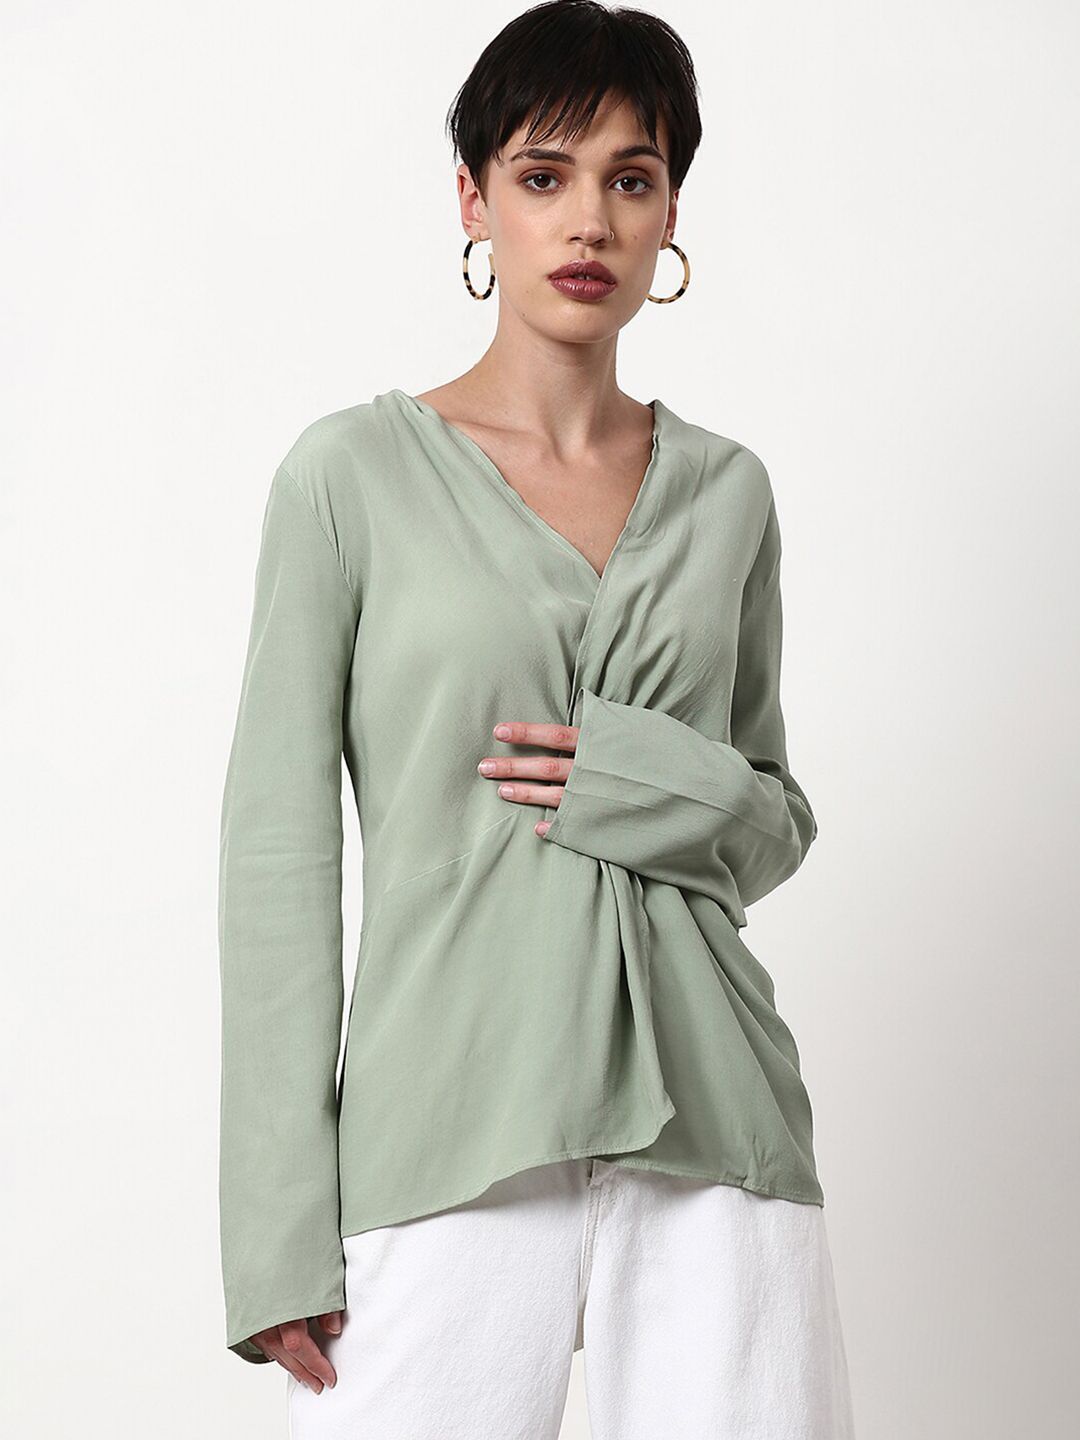 abof Olive Green Twisted Wrap Solid V-Neck Top Price in India